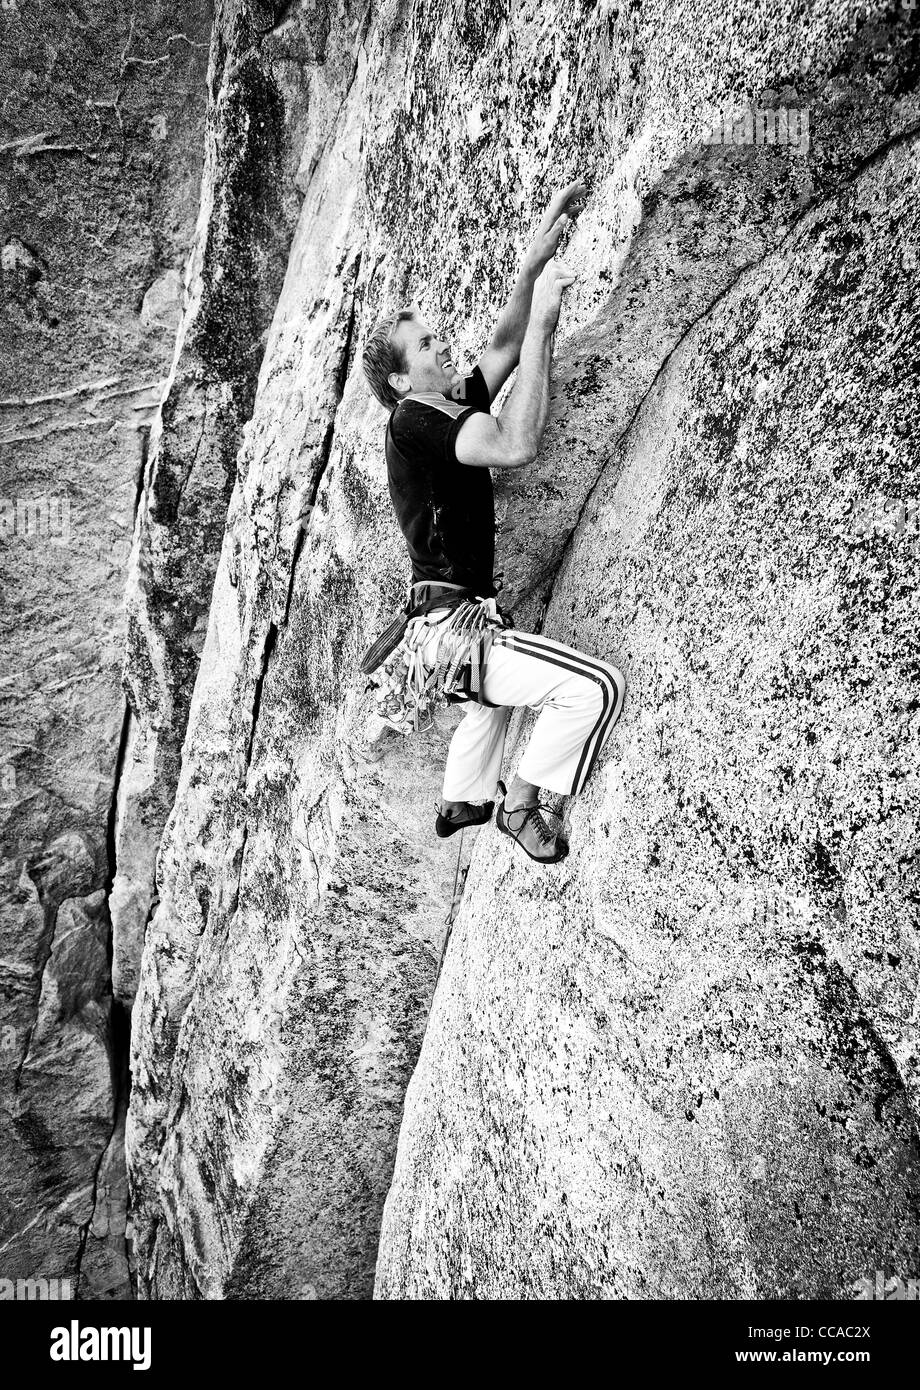 Male climber struggles for his next grip on a challenging ascent. Stock Photo